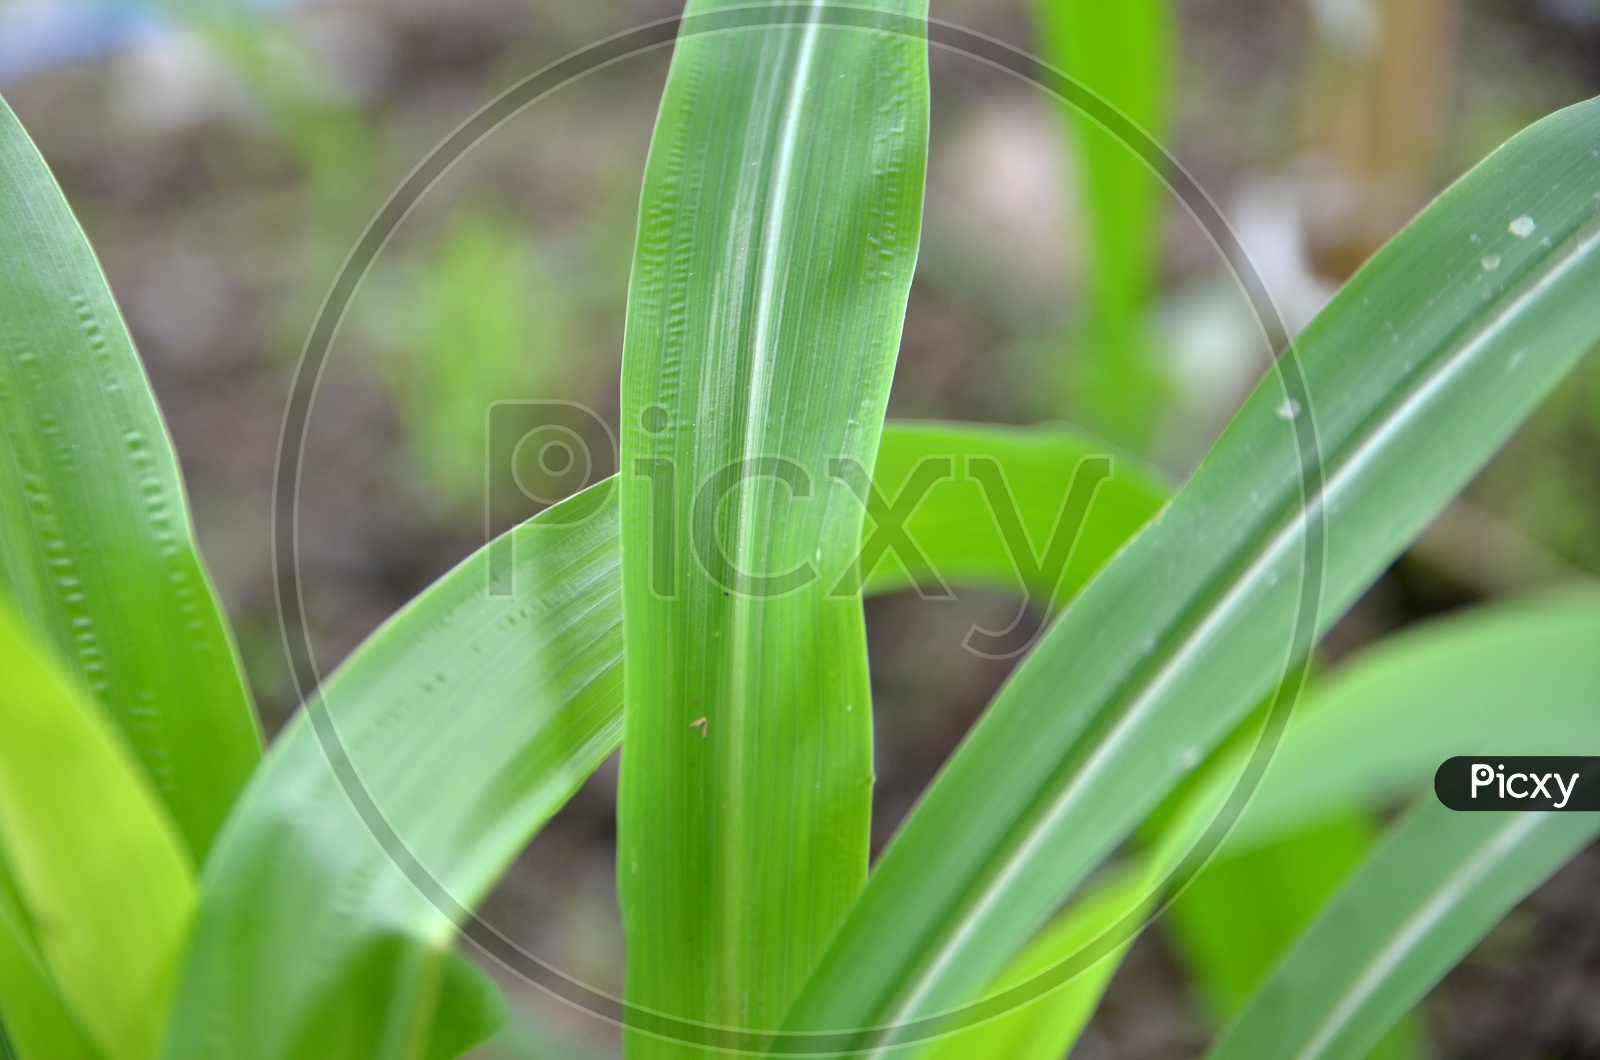 Green Leafs of a Plant Closeup Forming a Background